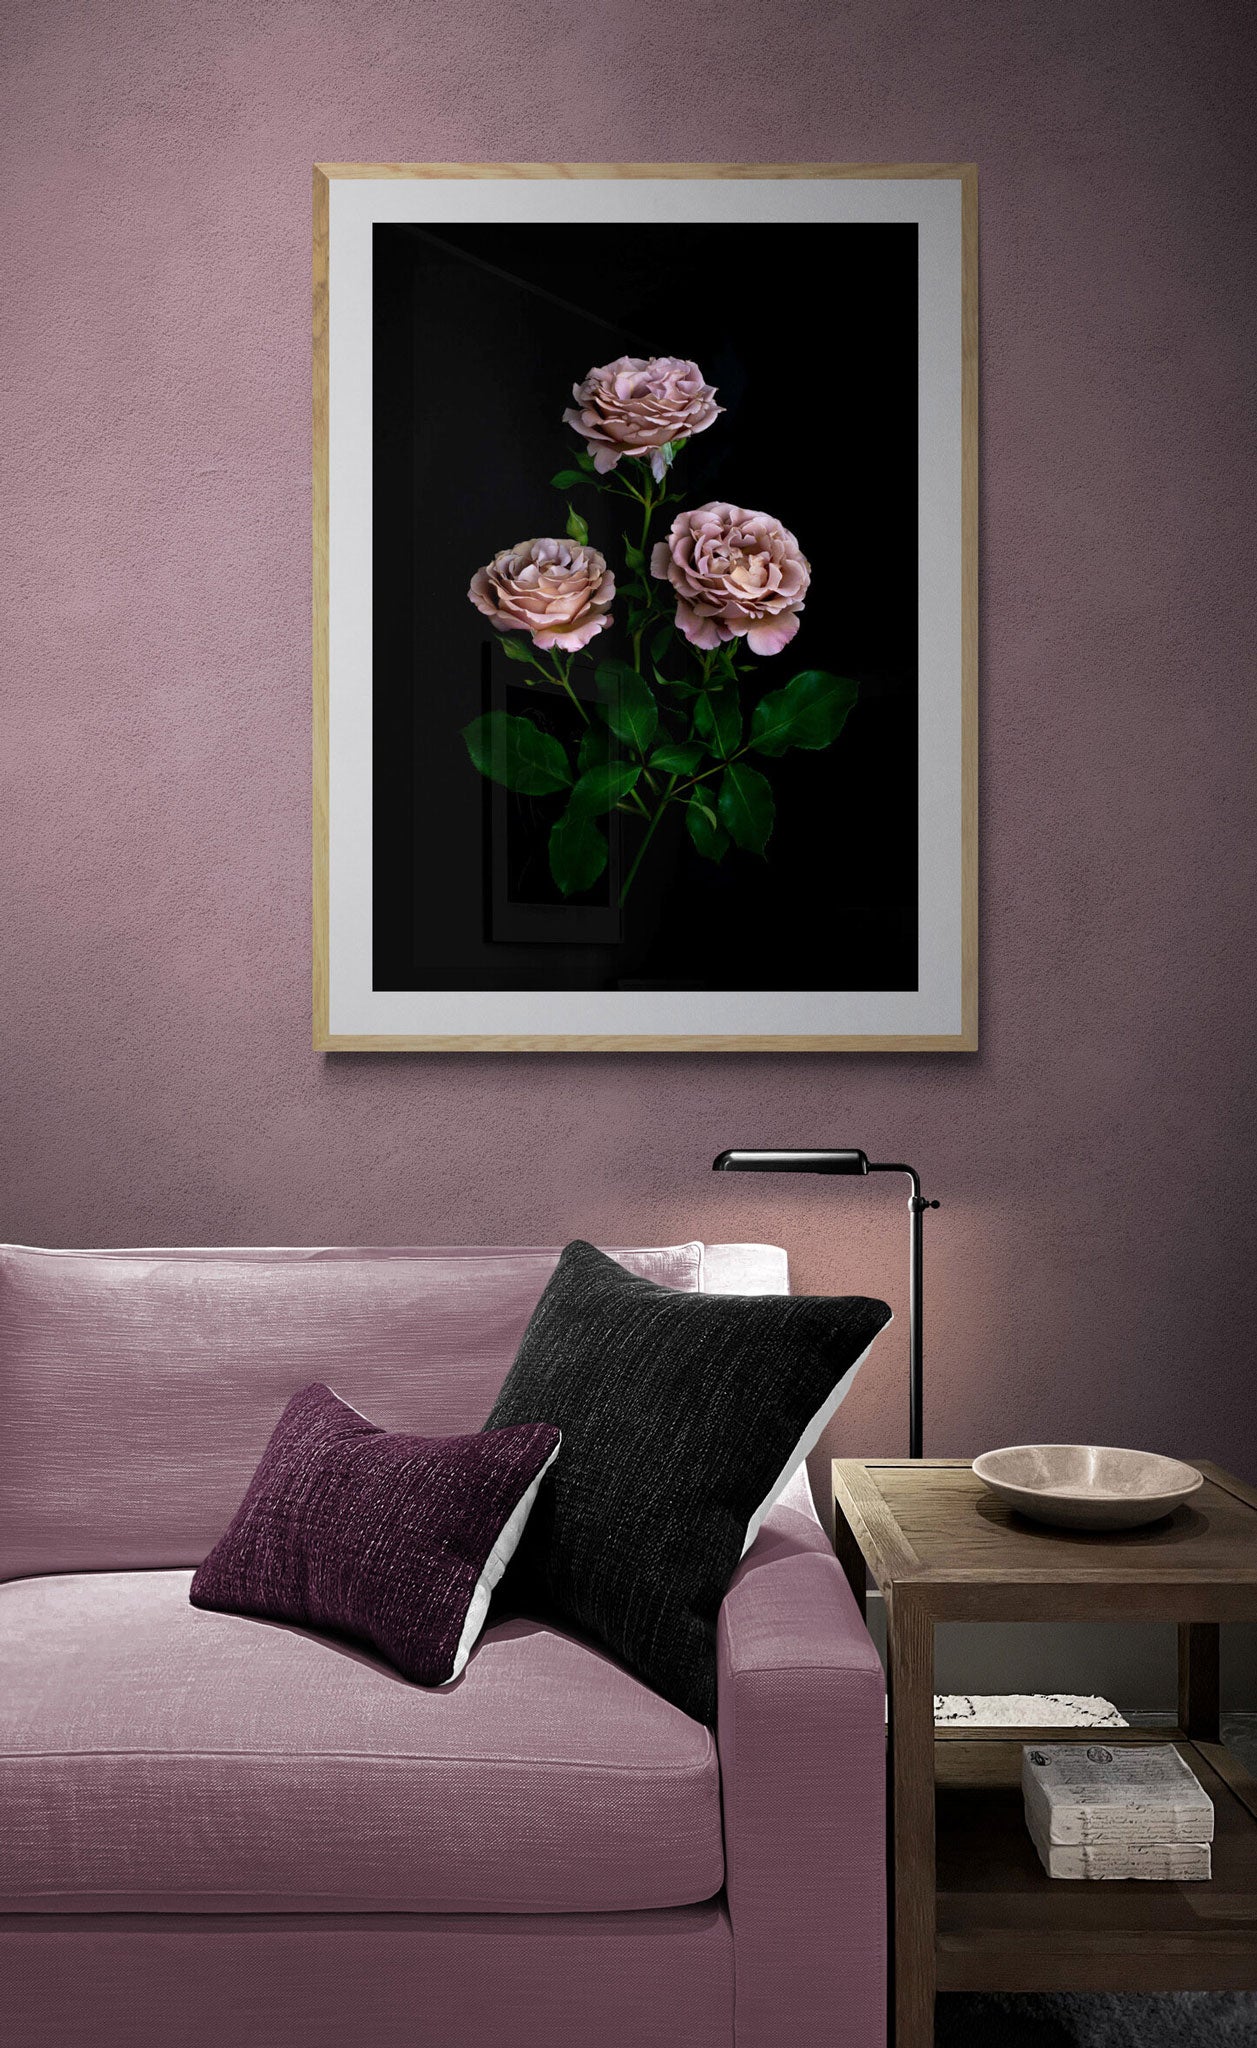 Dark botanical photographic print, featuring Rosa 'Koko Loco' on a black background., framed on a dusky pink wall.